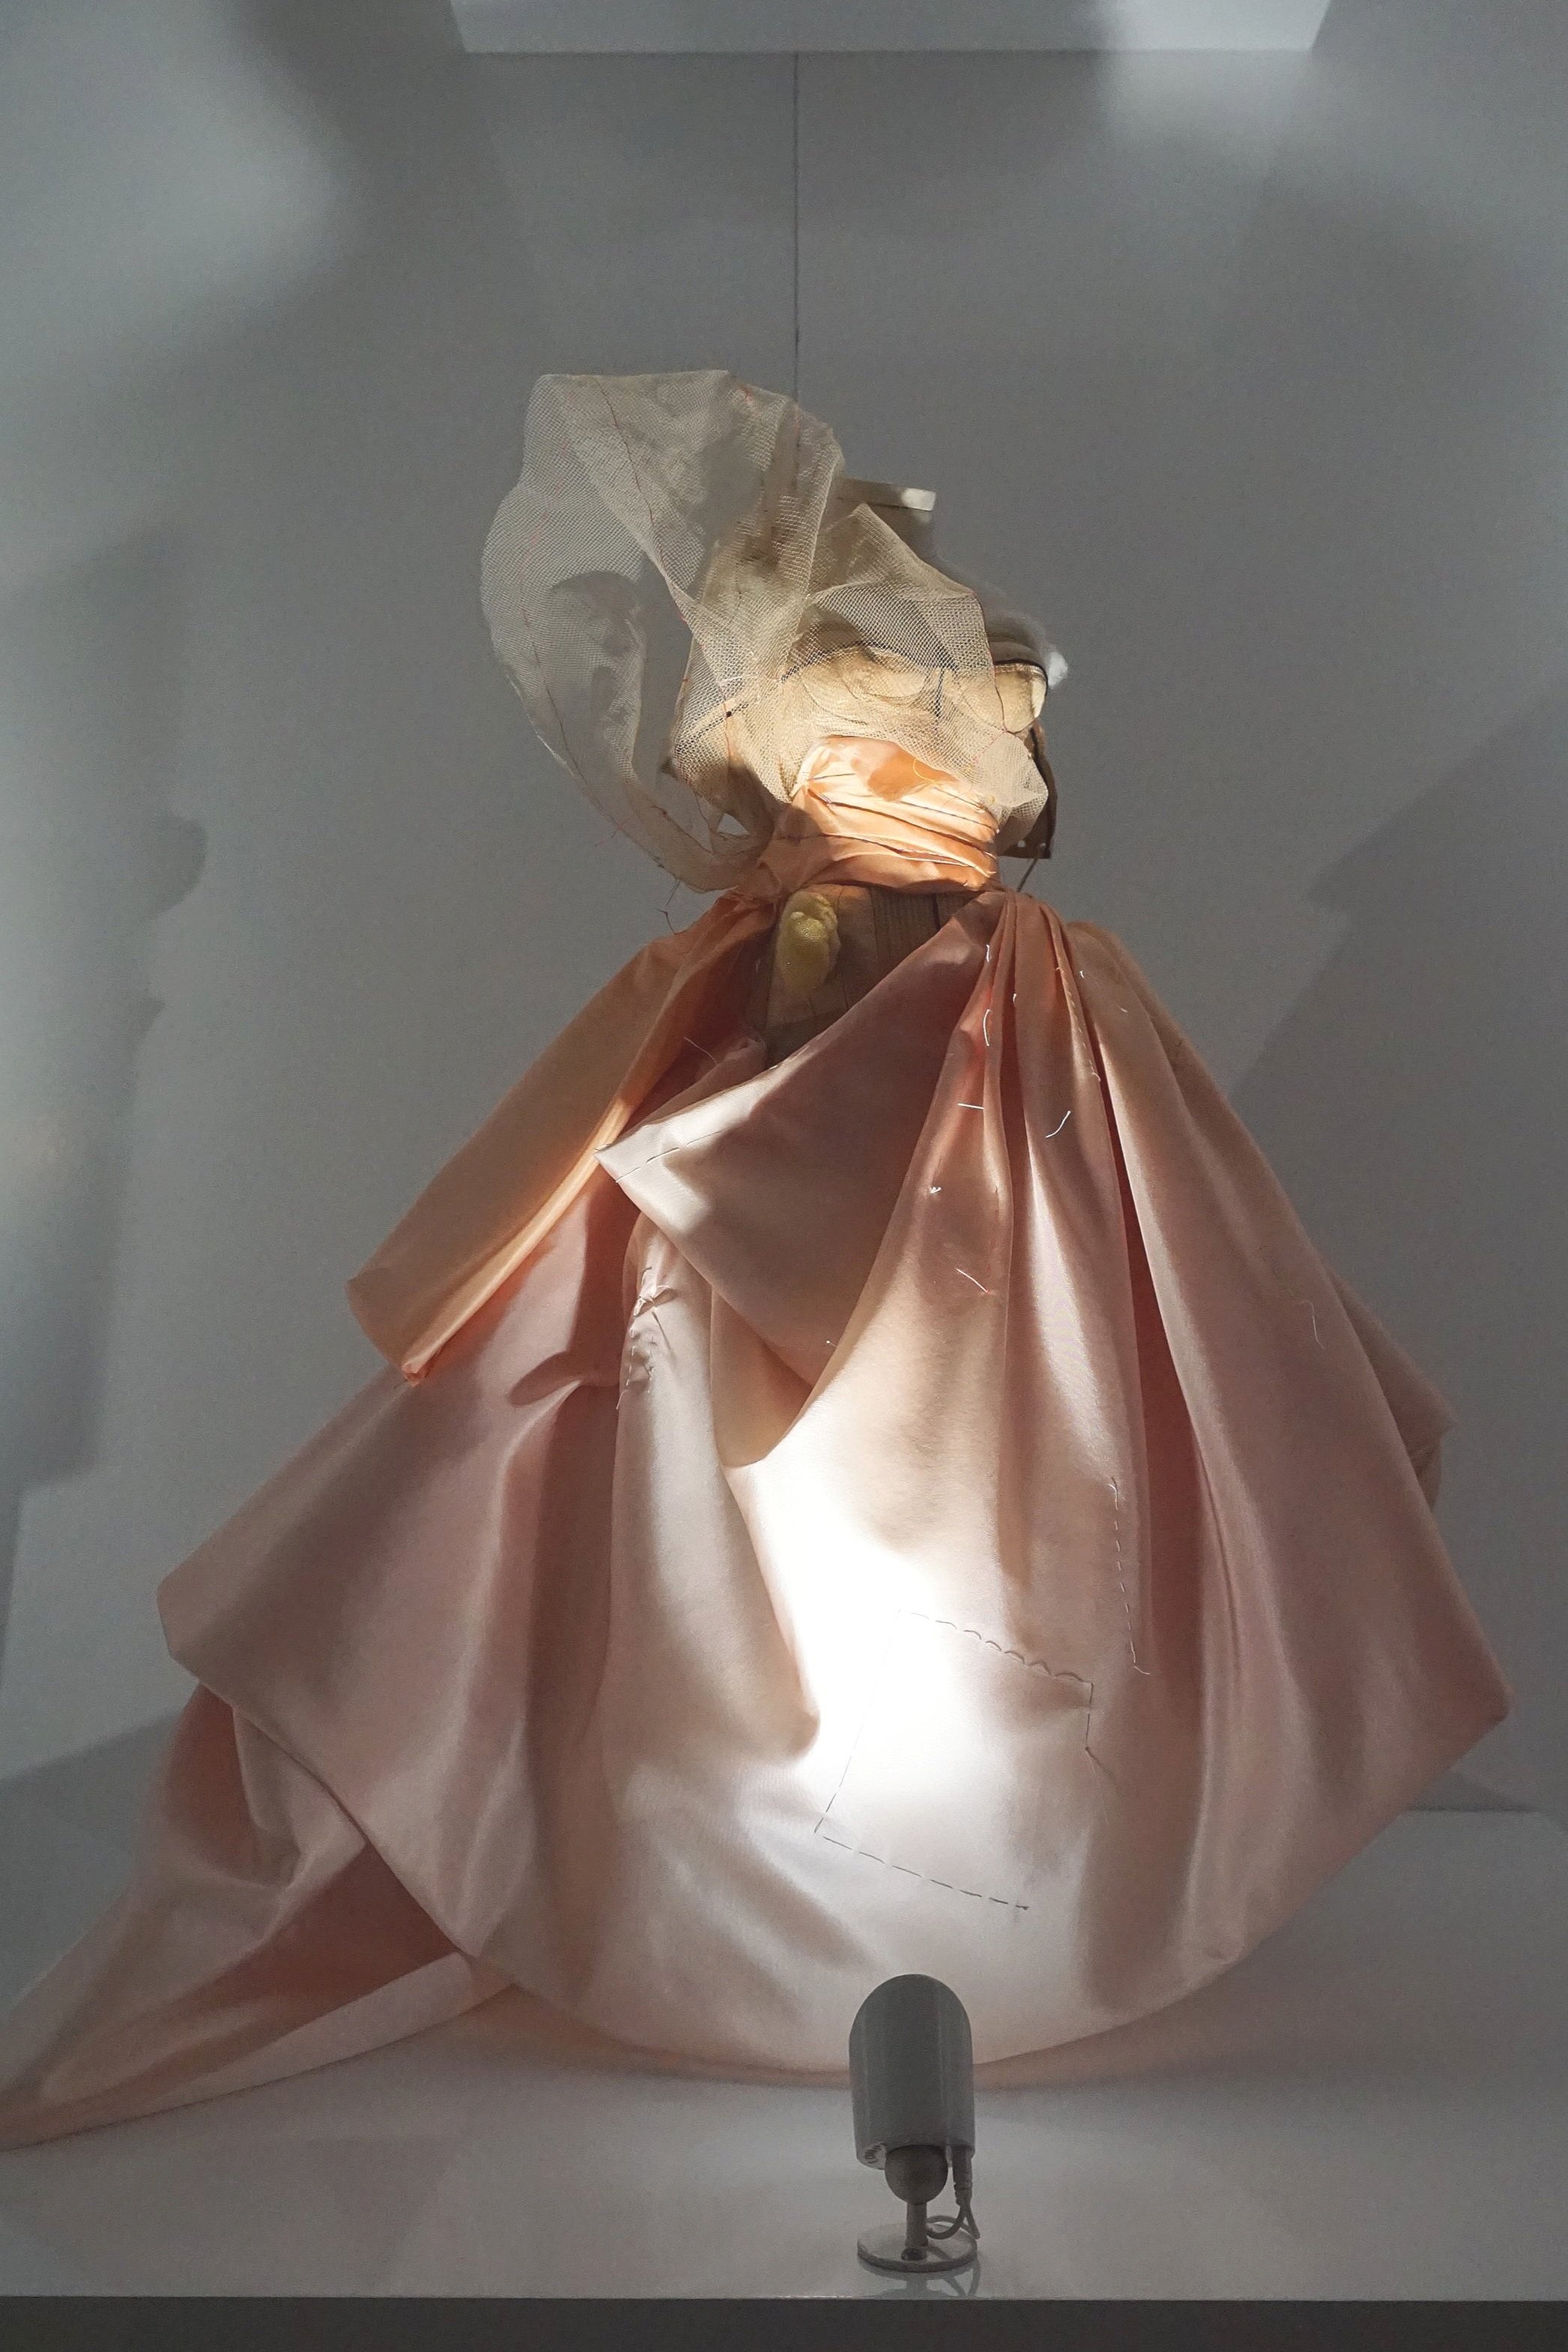 Miniature of a deconstructed Haute couture gown by John Galliano for Dior